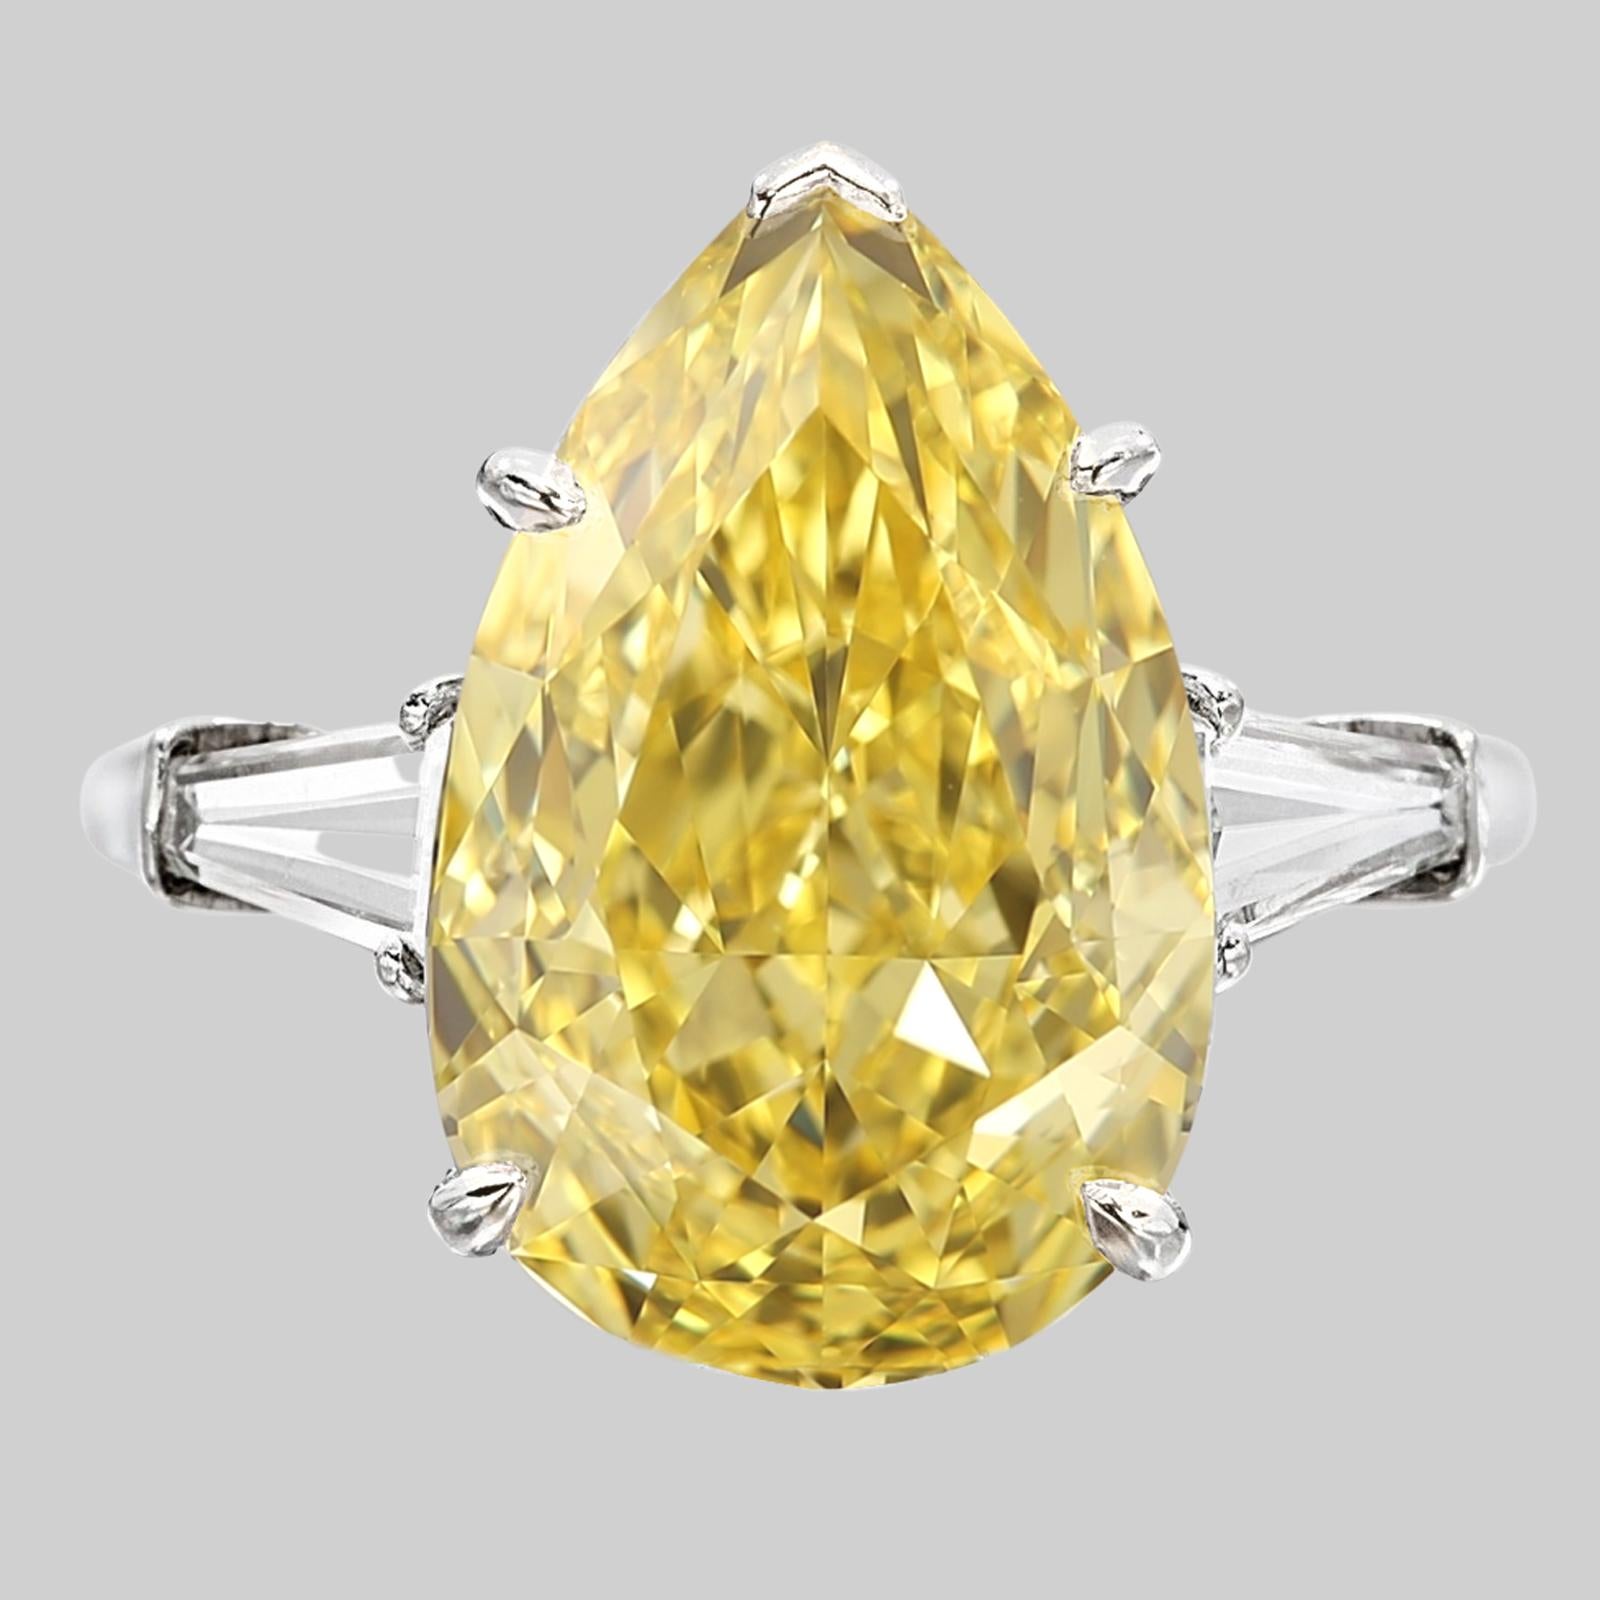 Introducing the stunning GIA Certified 5.03 Carat Fancy Yellow Diamond Ring, a radiant expression of luxury and sophistication. At its center gleams a captivating fancy light yellow diamond, certified by the prestigious Gemological Institute of